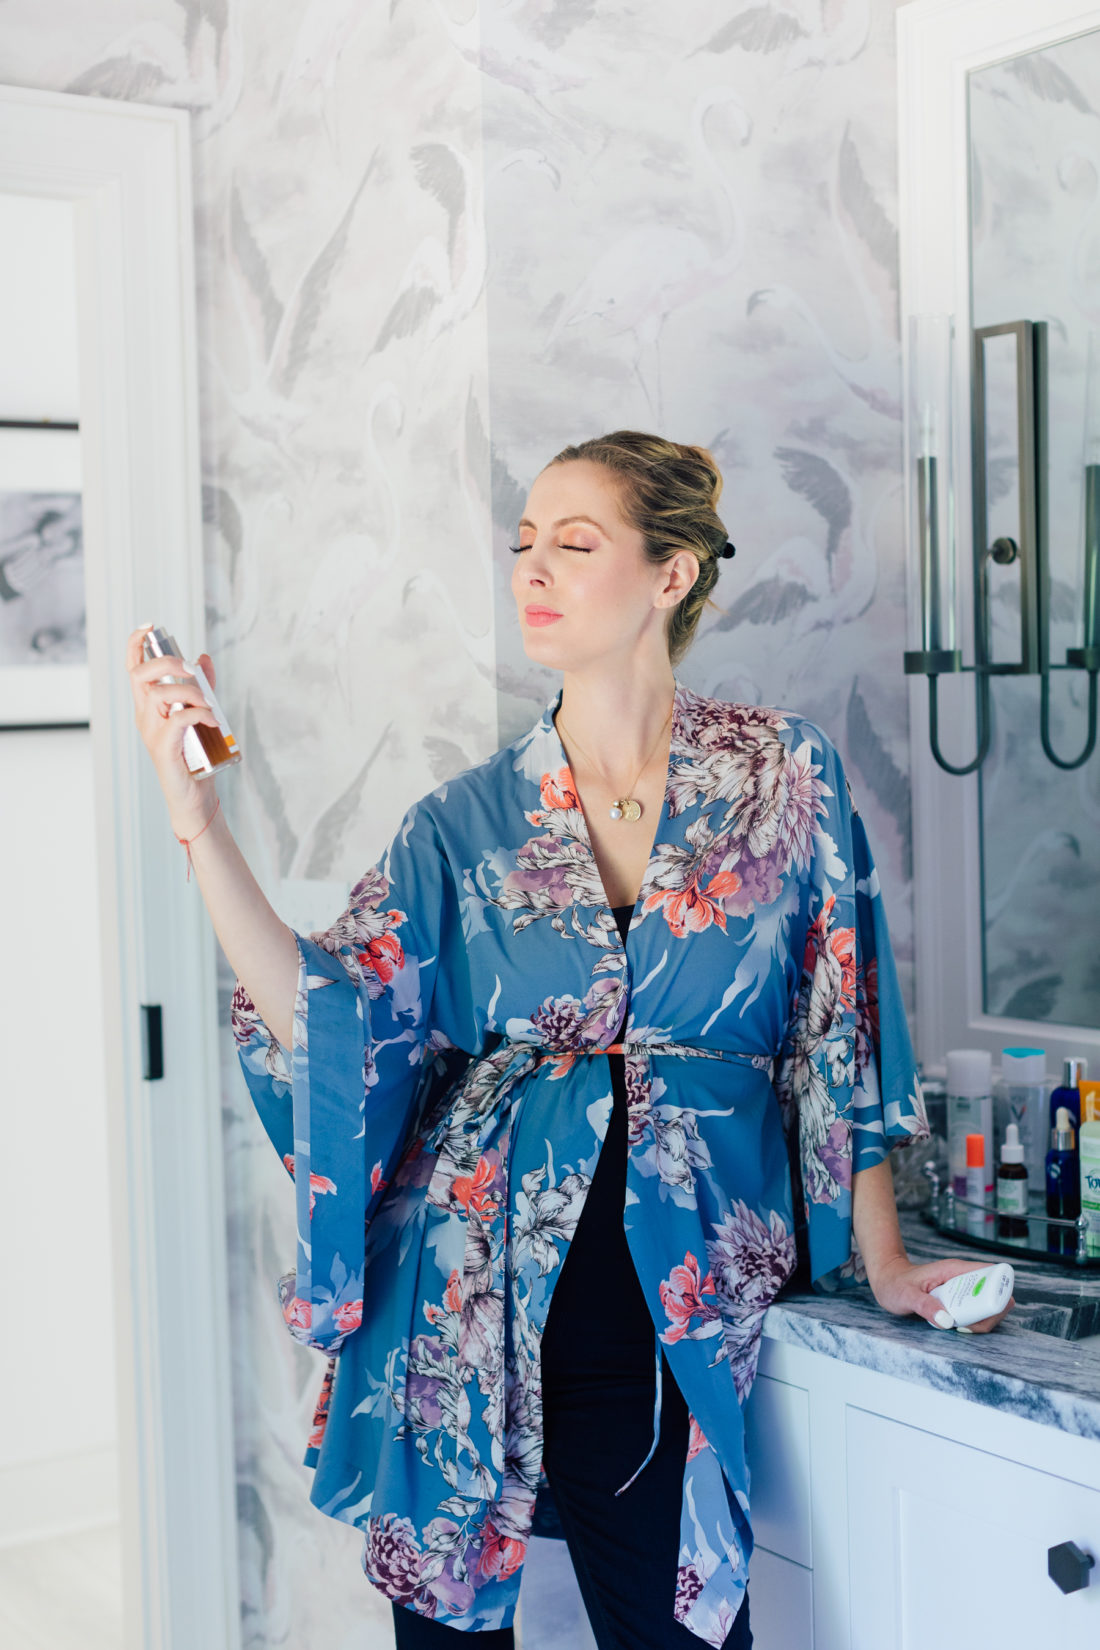 Eva Amurri Martino shares her updated pregnancy safe beauty routine while she sprays Dr. Hauschka's Facial Toner on her face